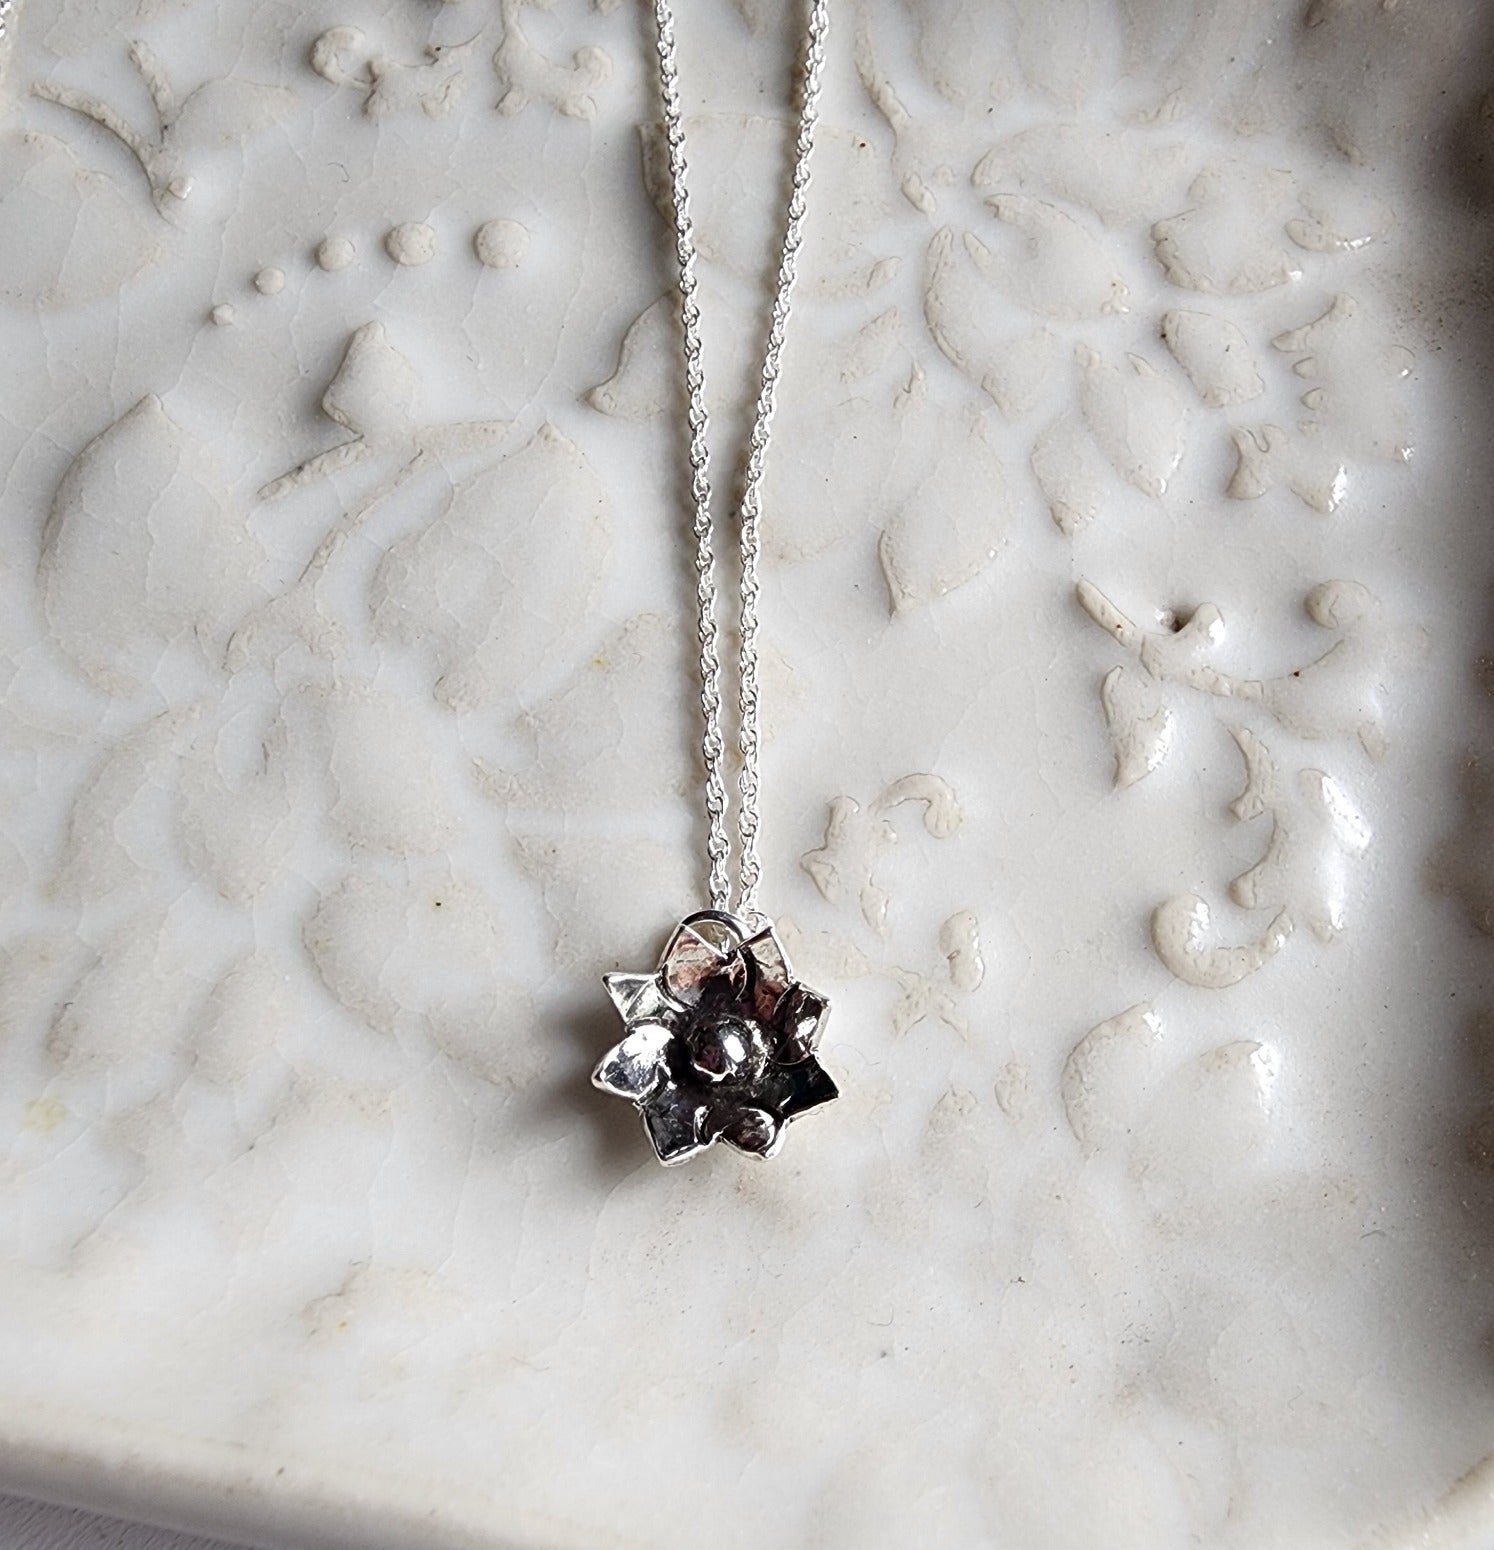 Tiny flower pendant hanging from a dainty silver chain